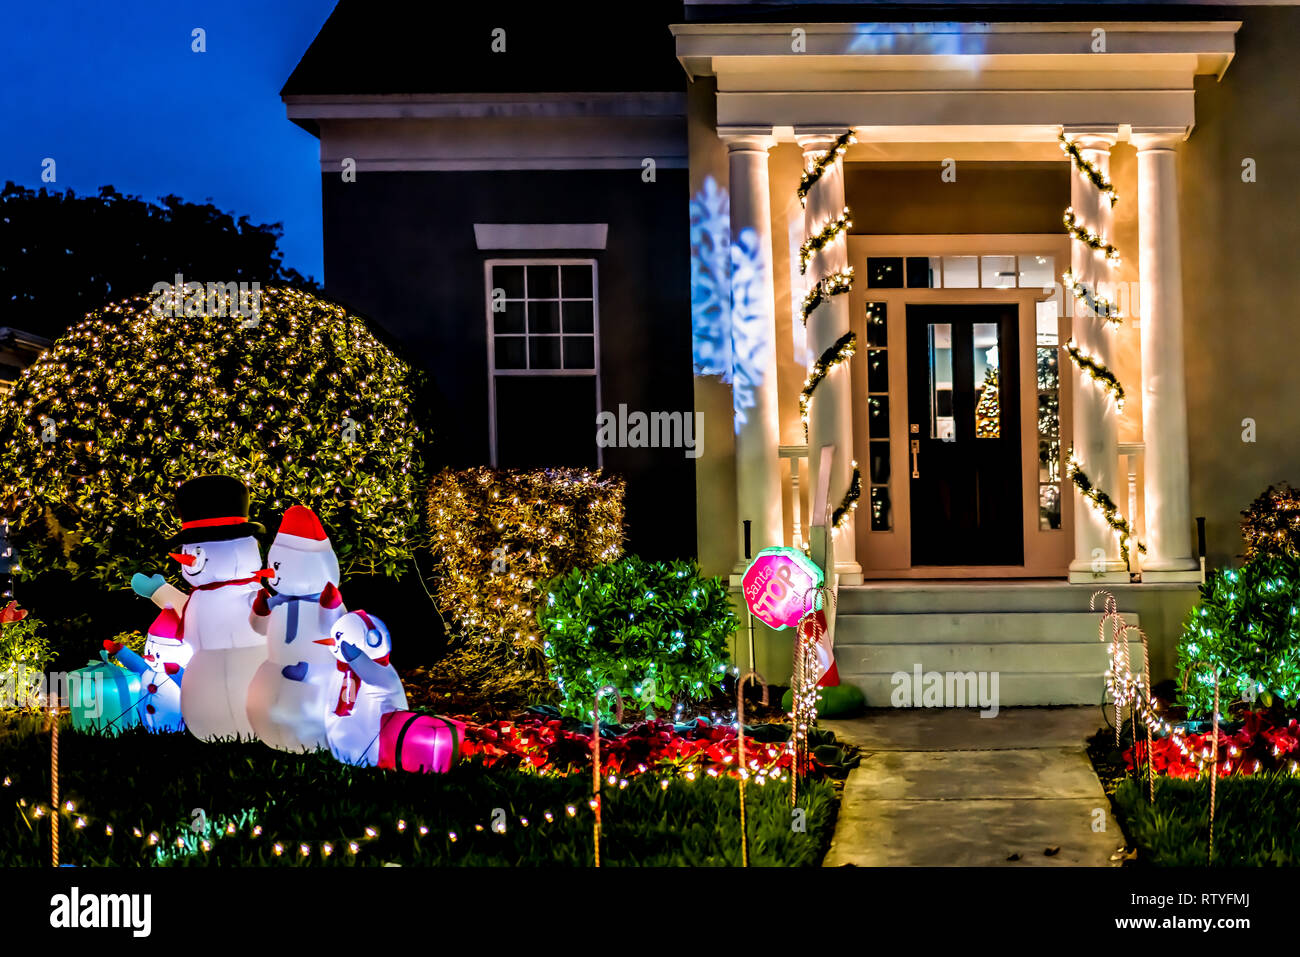 CELEBRATION, FLORIDA, USA - DECEMBER, 2018: Christmas Decorated House at Celebration City. Front House Adorned with Christmas Holiday Lights and Decor Stock Photo